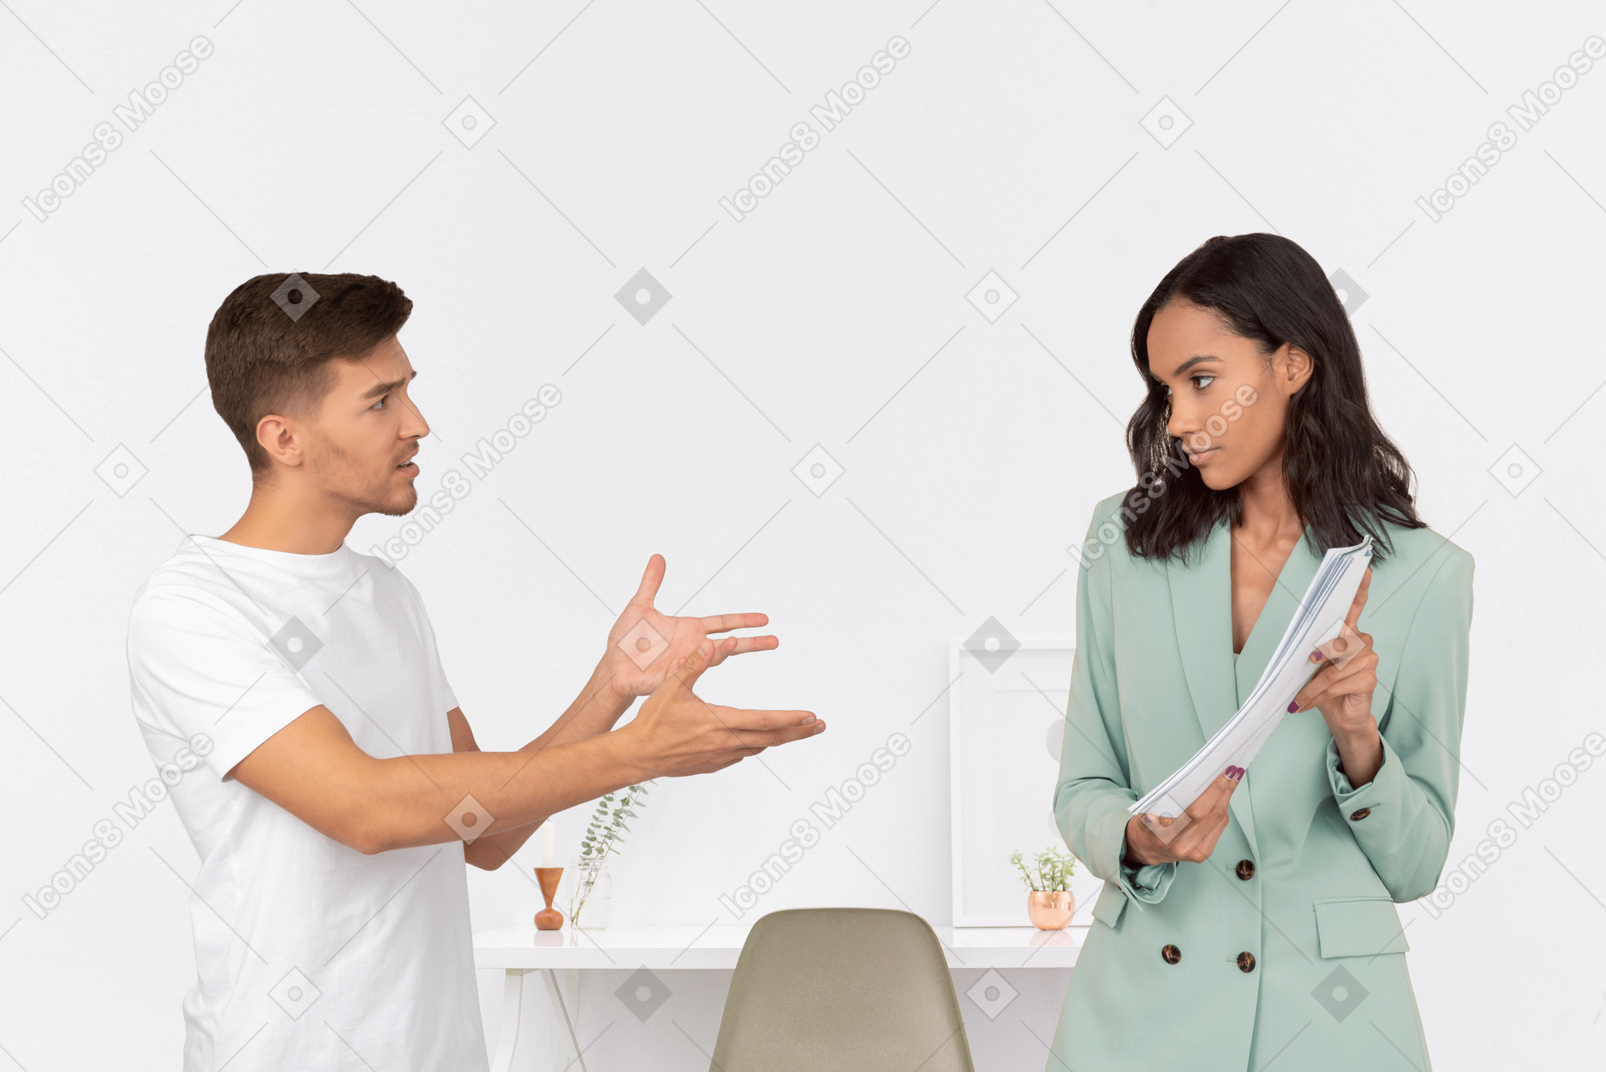 Female boss and male employee figuring out work stuff